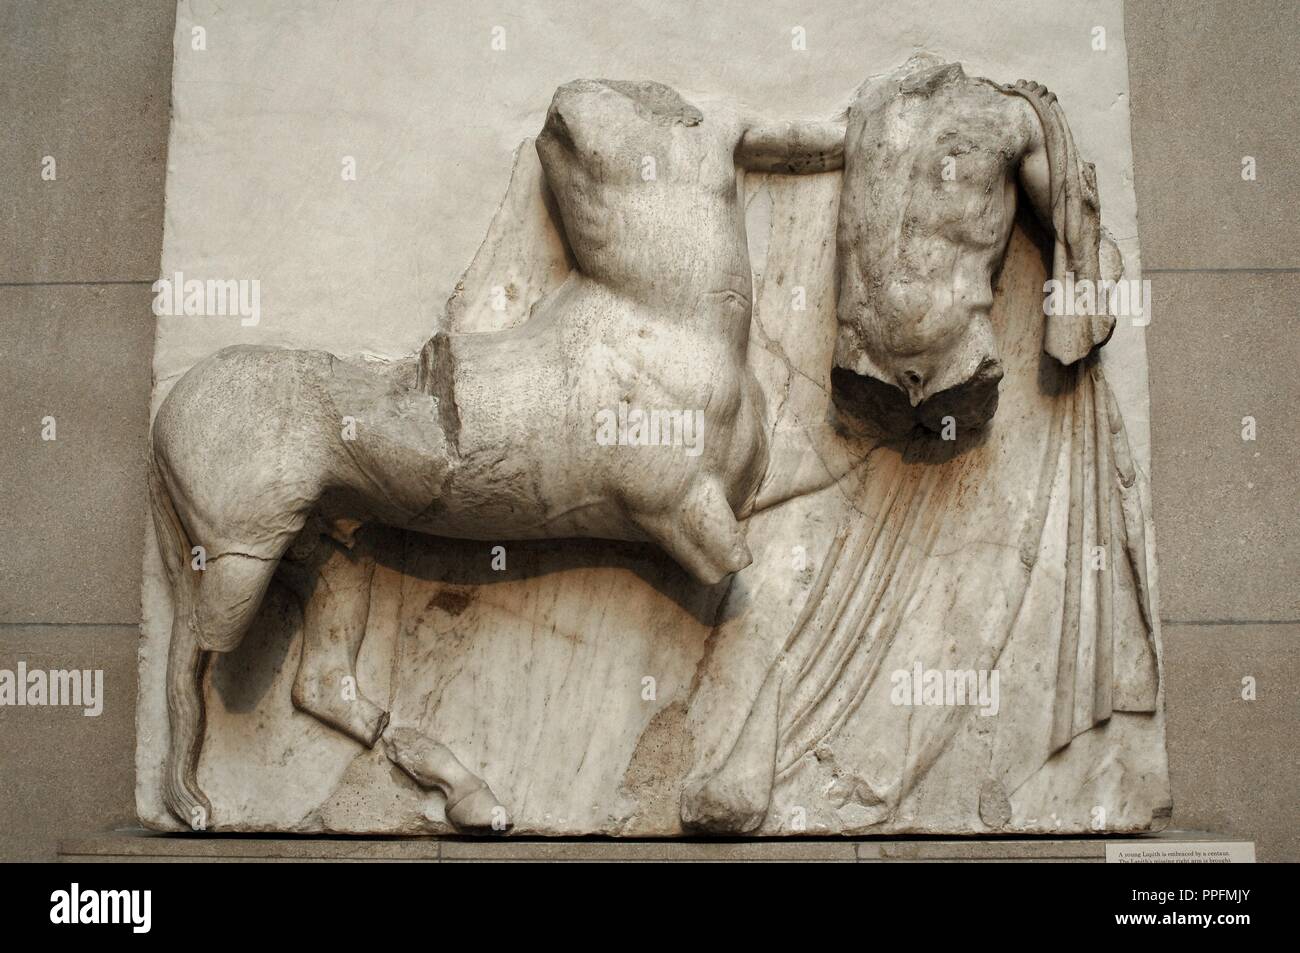 Metope VI from the Parthenon marbles depicting part of the battle between the Centaurs and the Lapiths. 5th century BC. Athens. British Museum. London. United Kingdom. Stock Photo